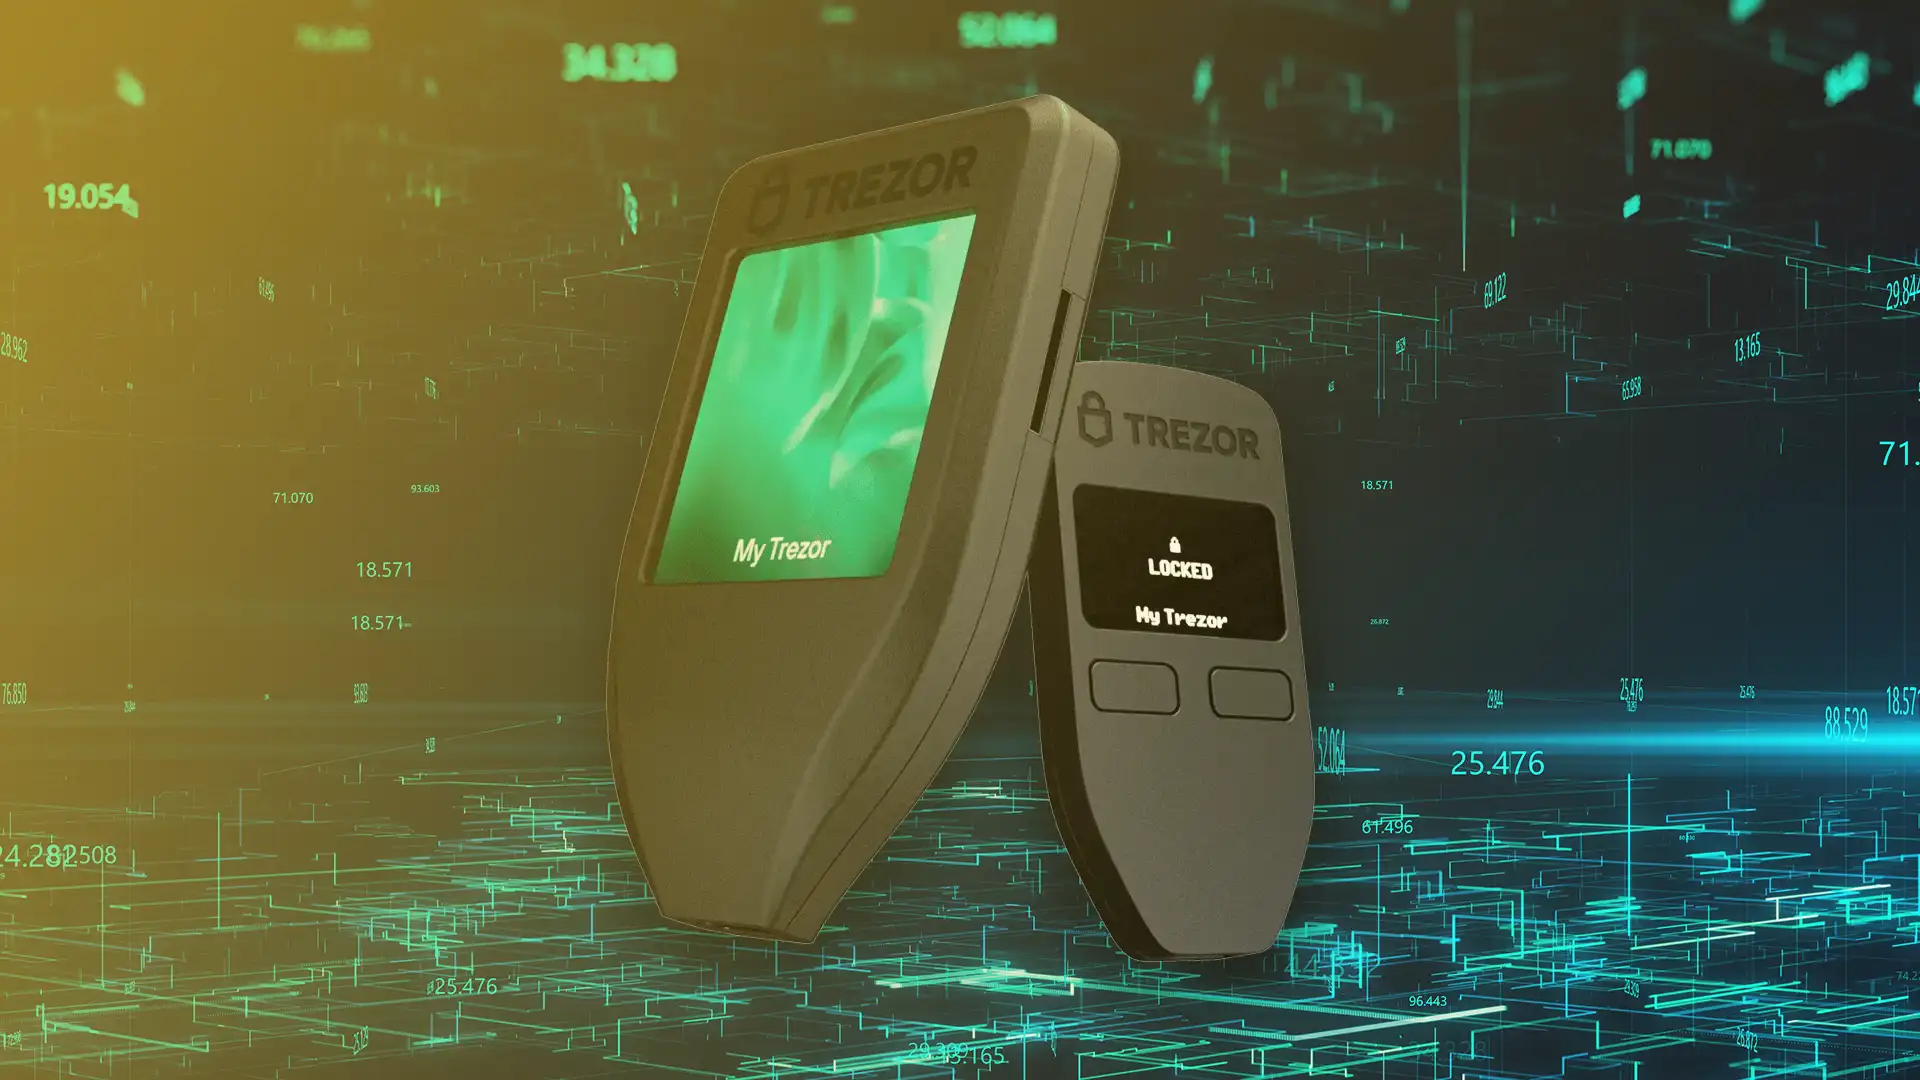 The Trezor Model T Cryptocurrency Hardware Wallet